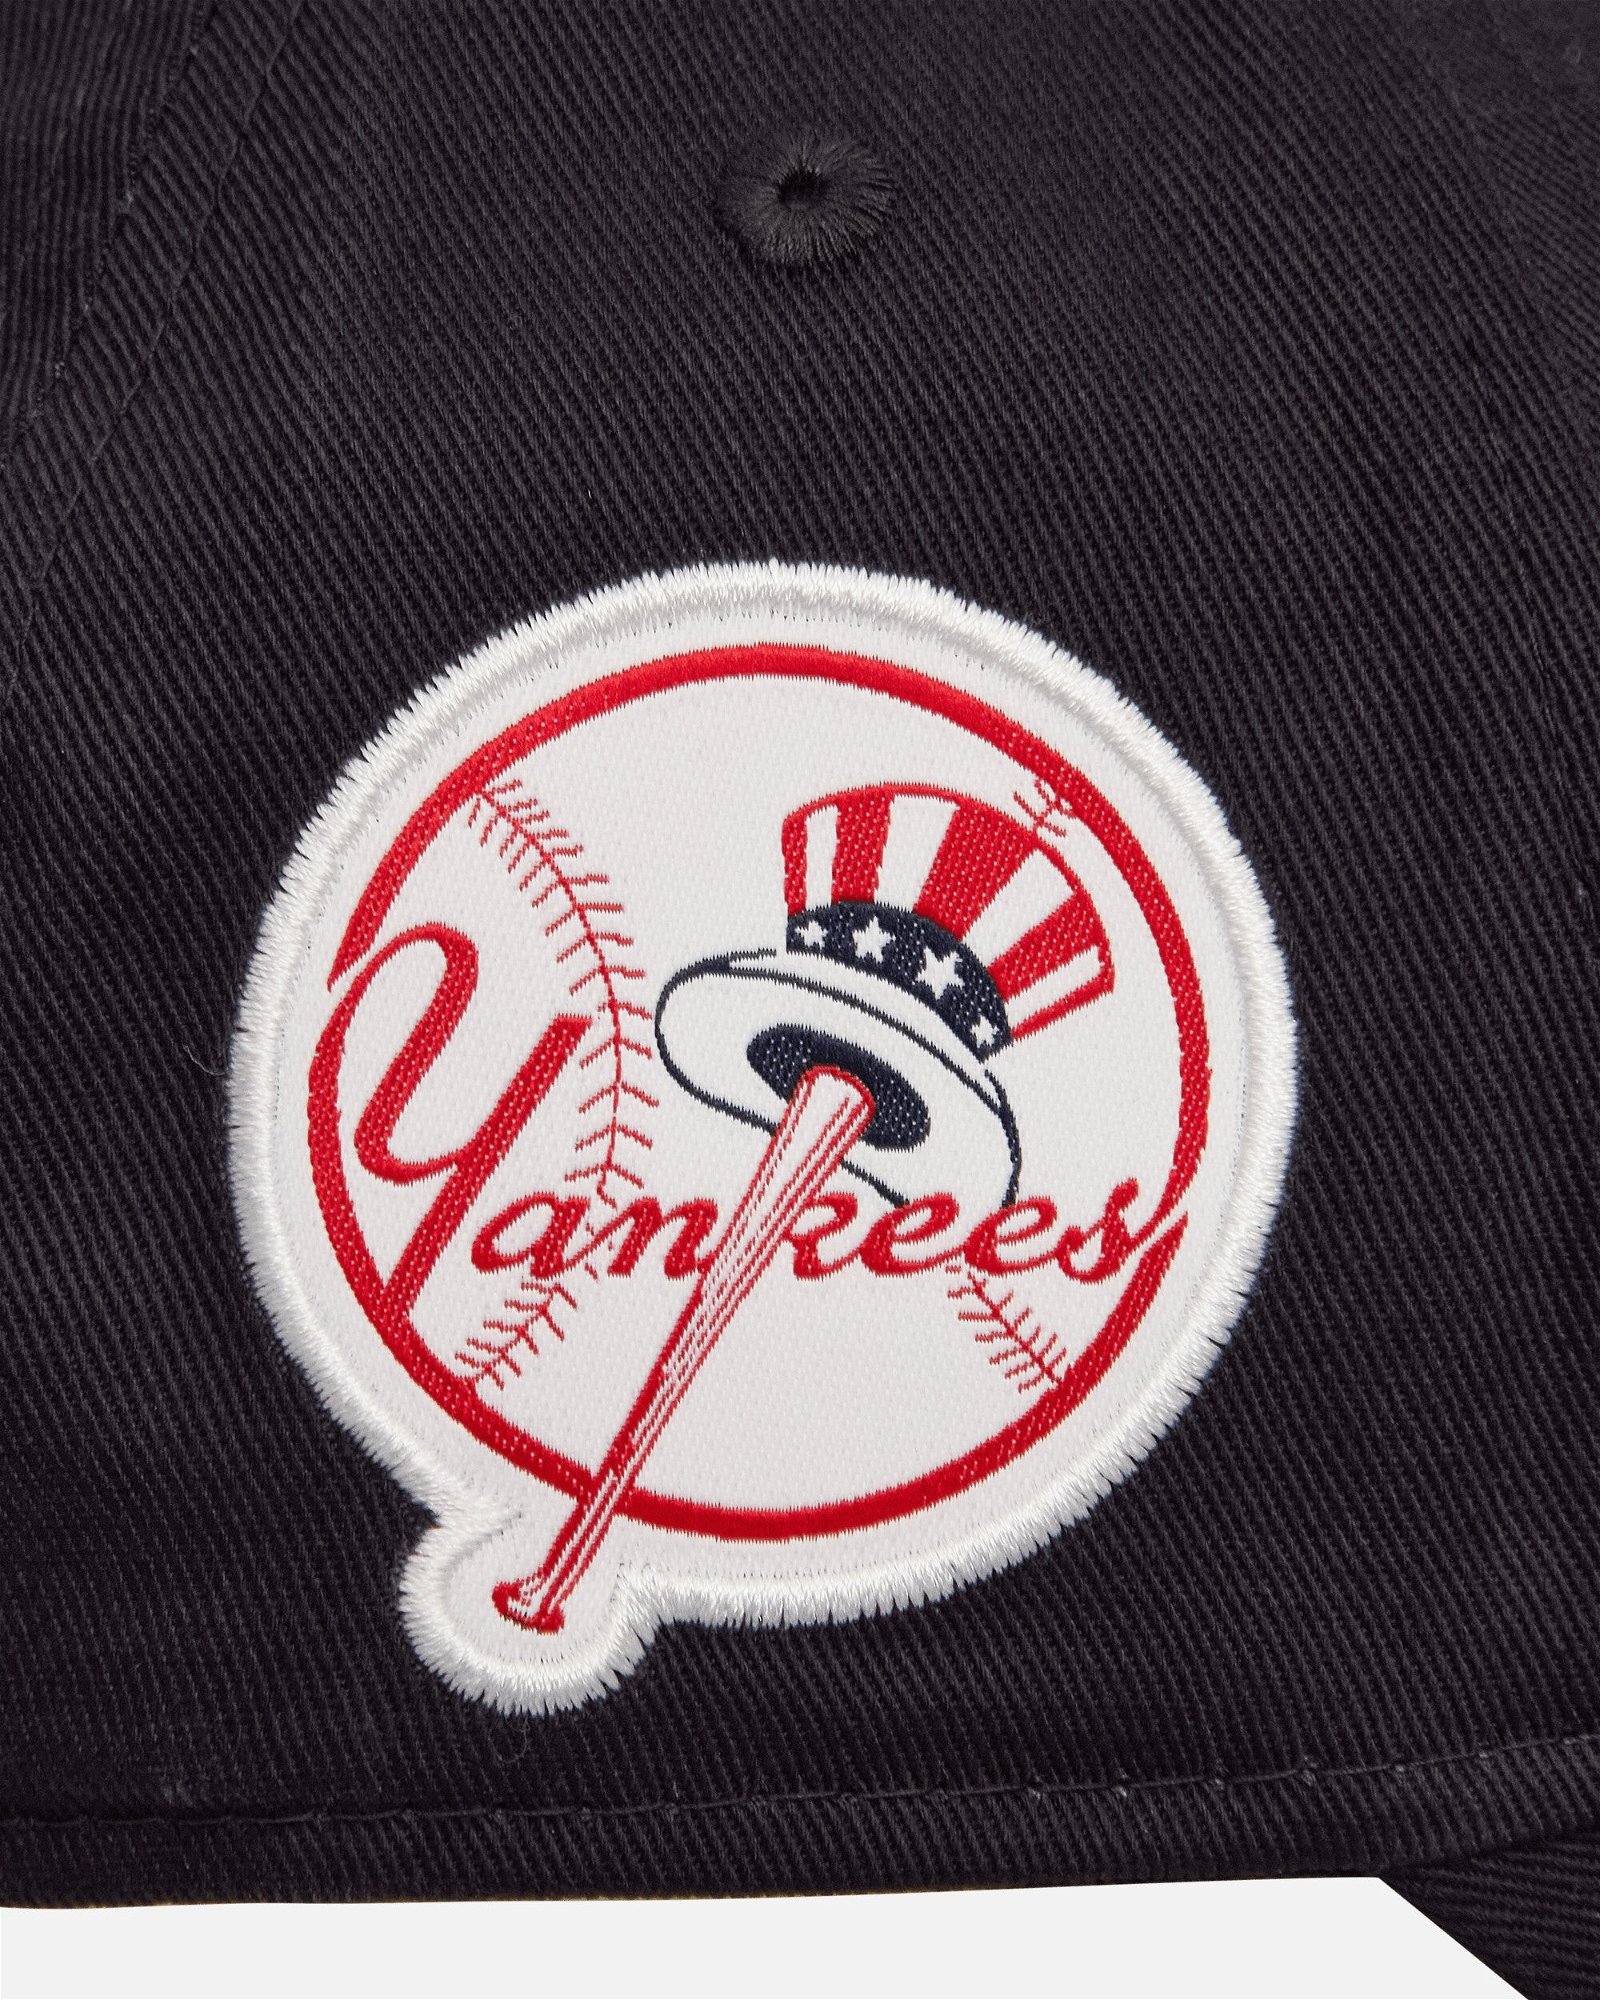 New York Yankees Team Side Patch 9FORTY Adjustable Cap